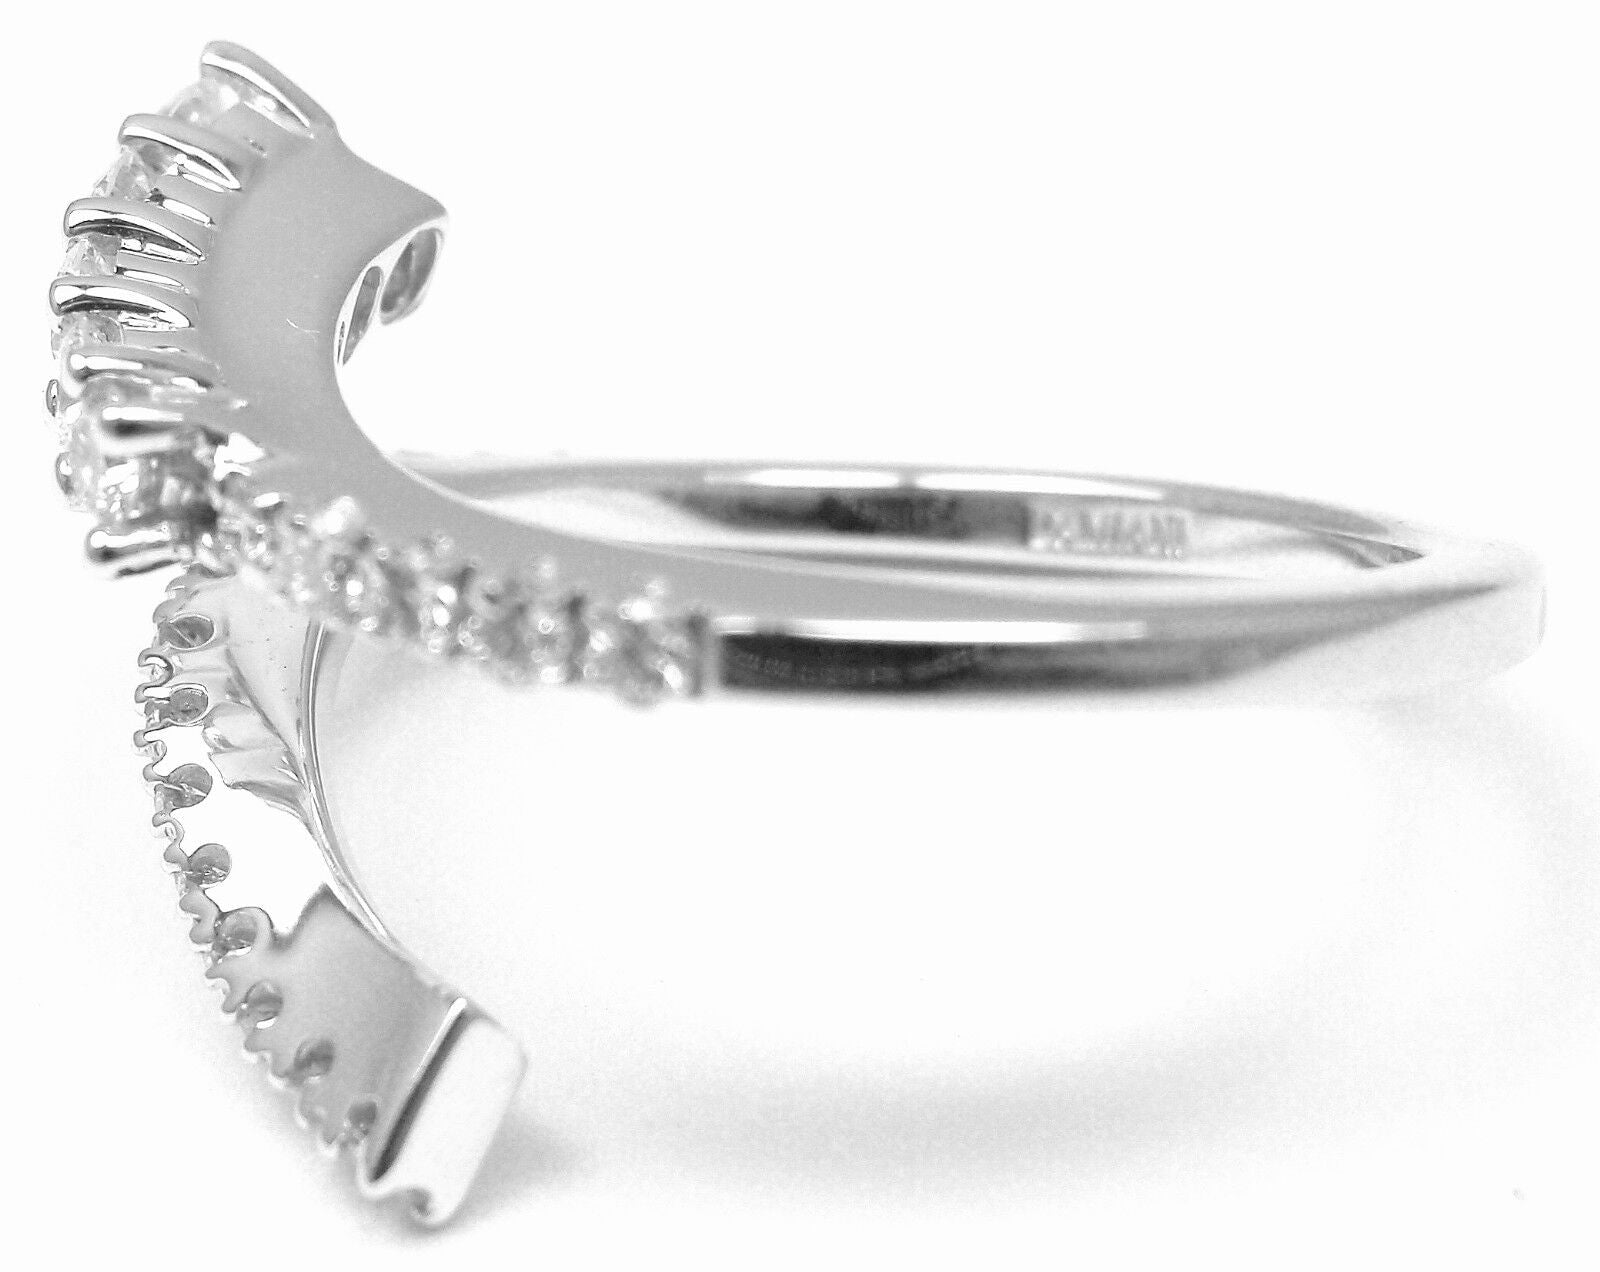 Damiani Jewelry & Watches:Fine Jewelry:Rings New! Authentic Damiani EDEN 18k White Gold Diamond Band Ring